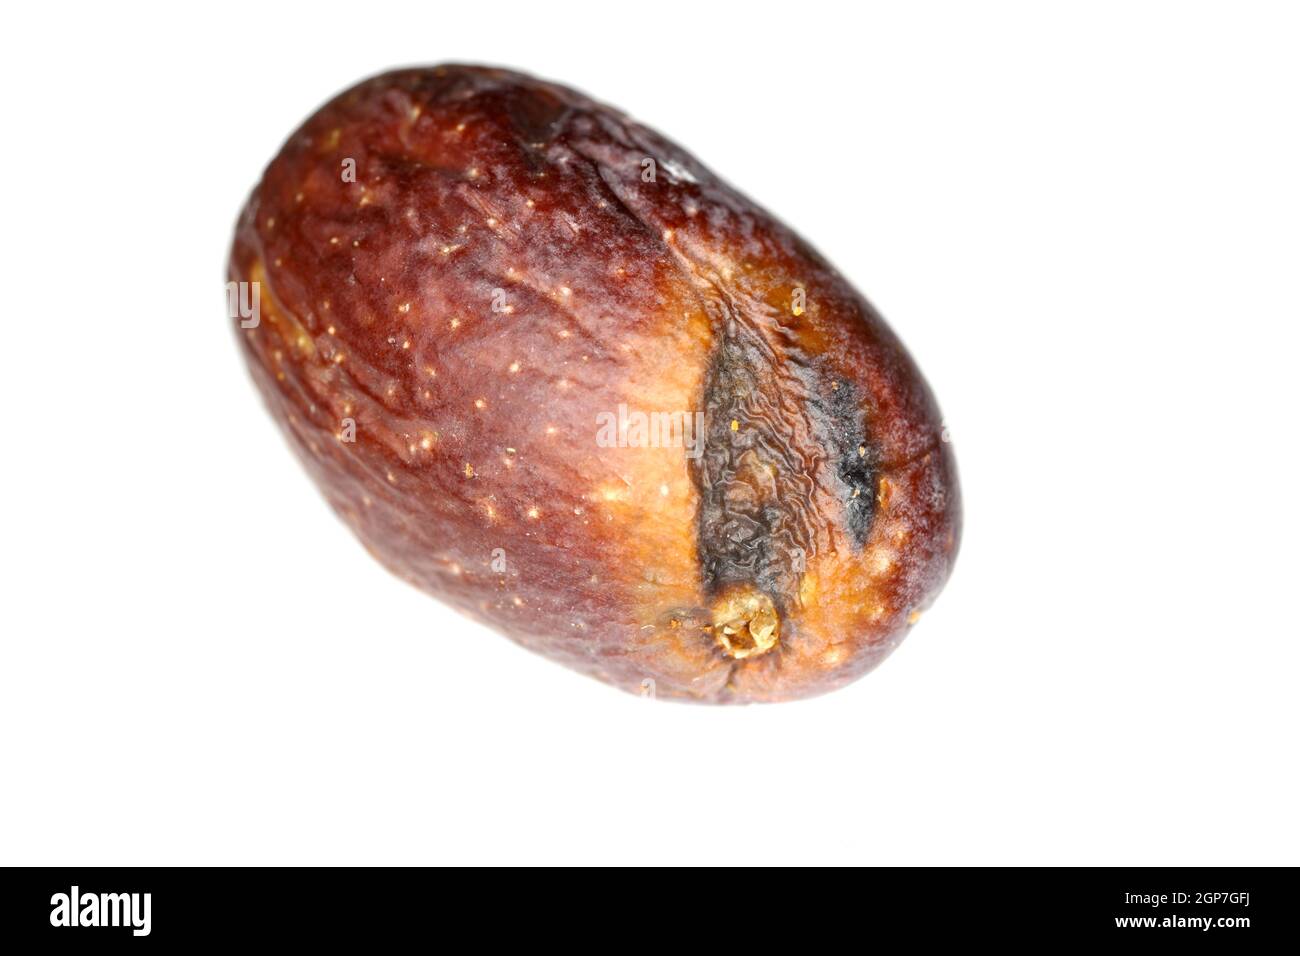 Olive fruit damaged by Olive Fruit fly- Bactrocera oleae. One of the most important olive pests. Stock Photo